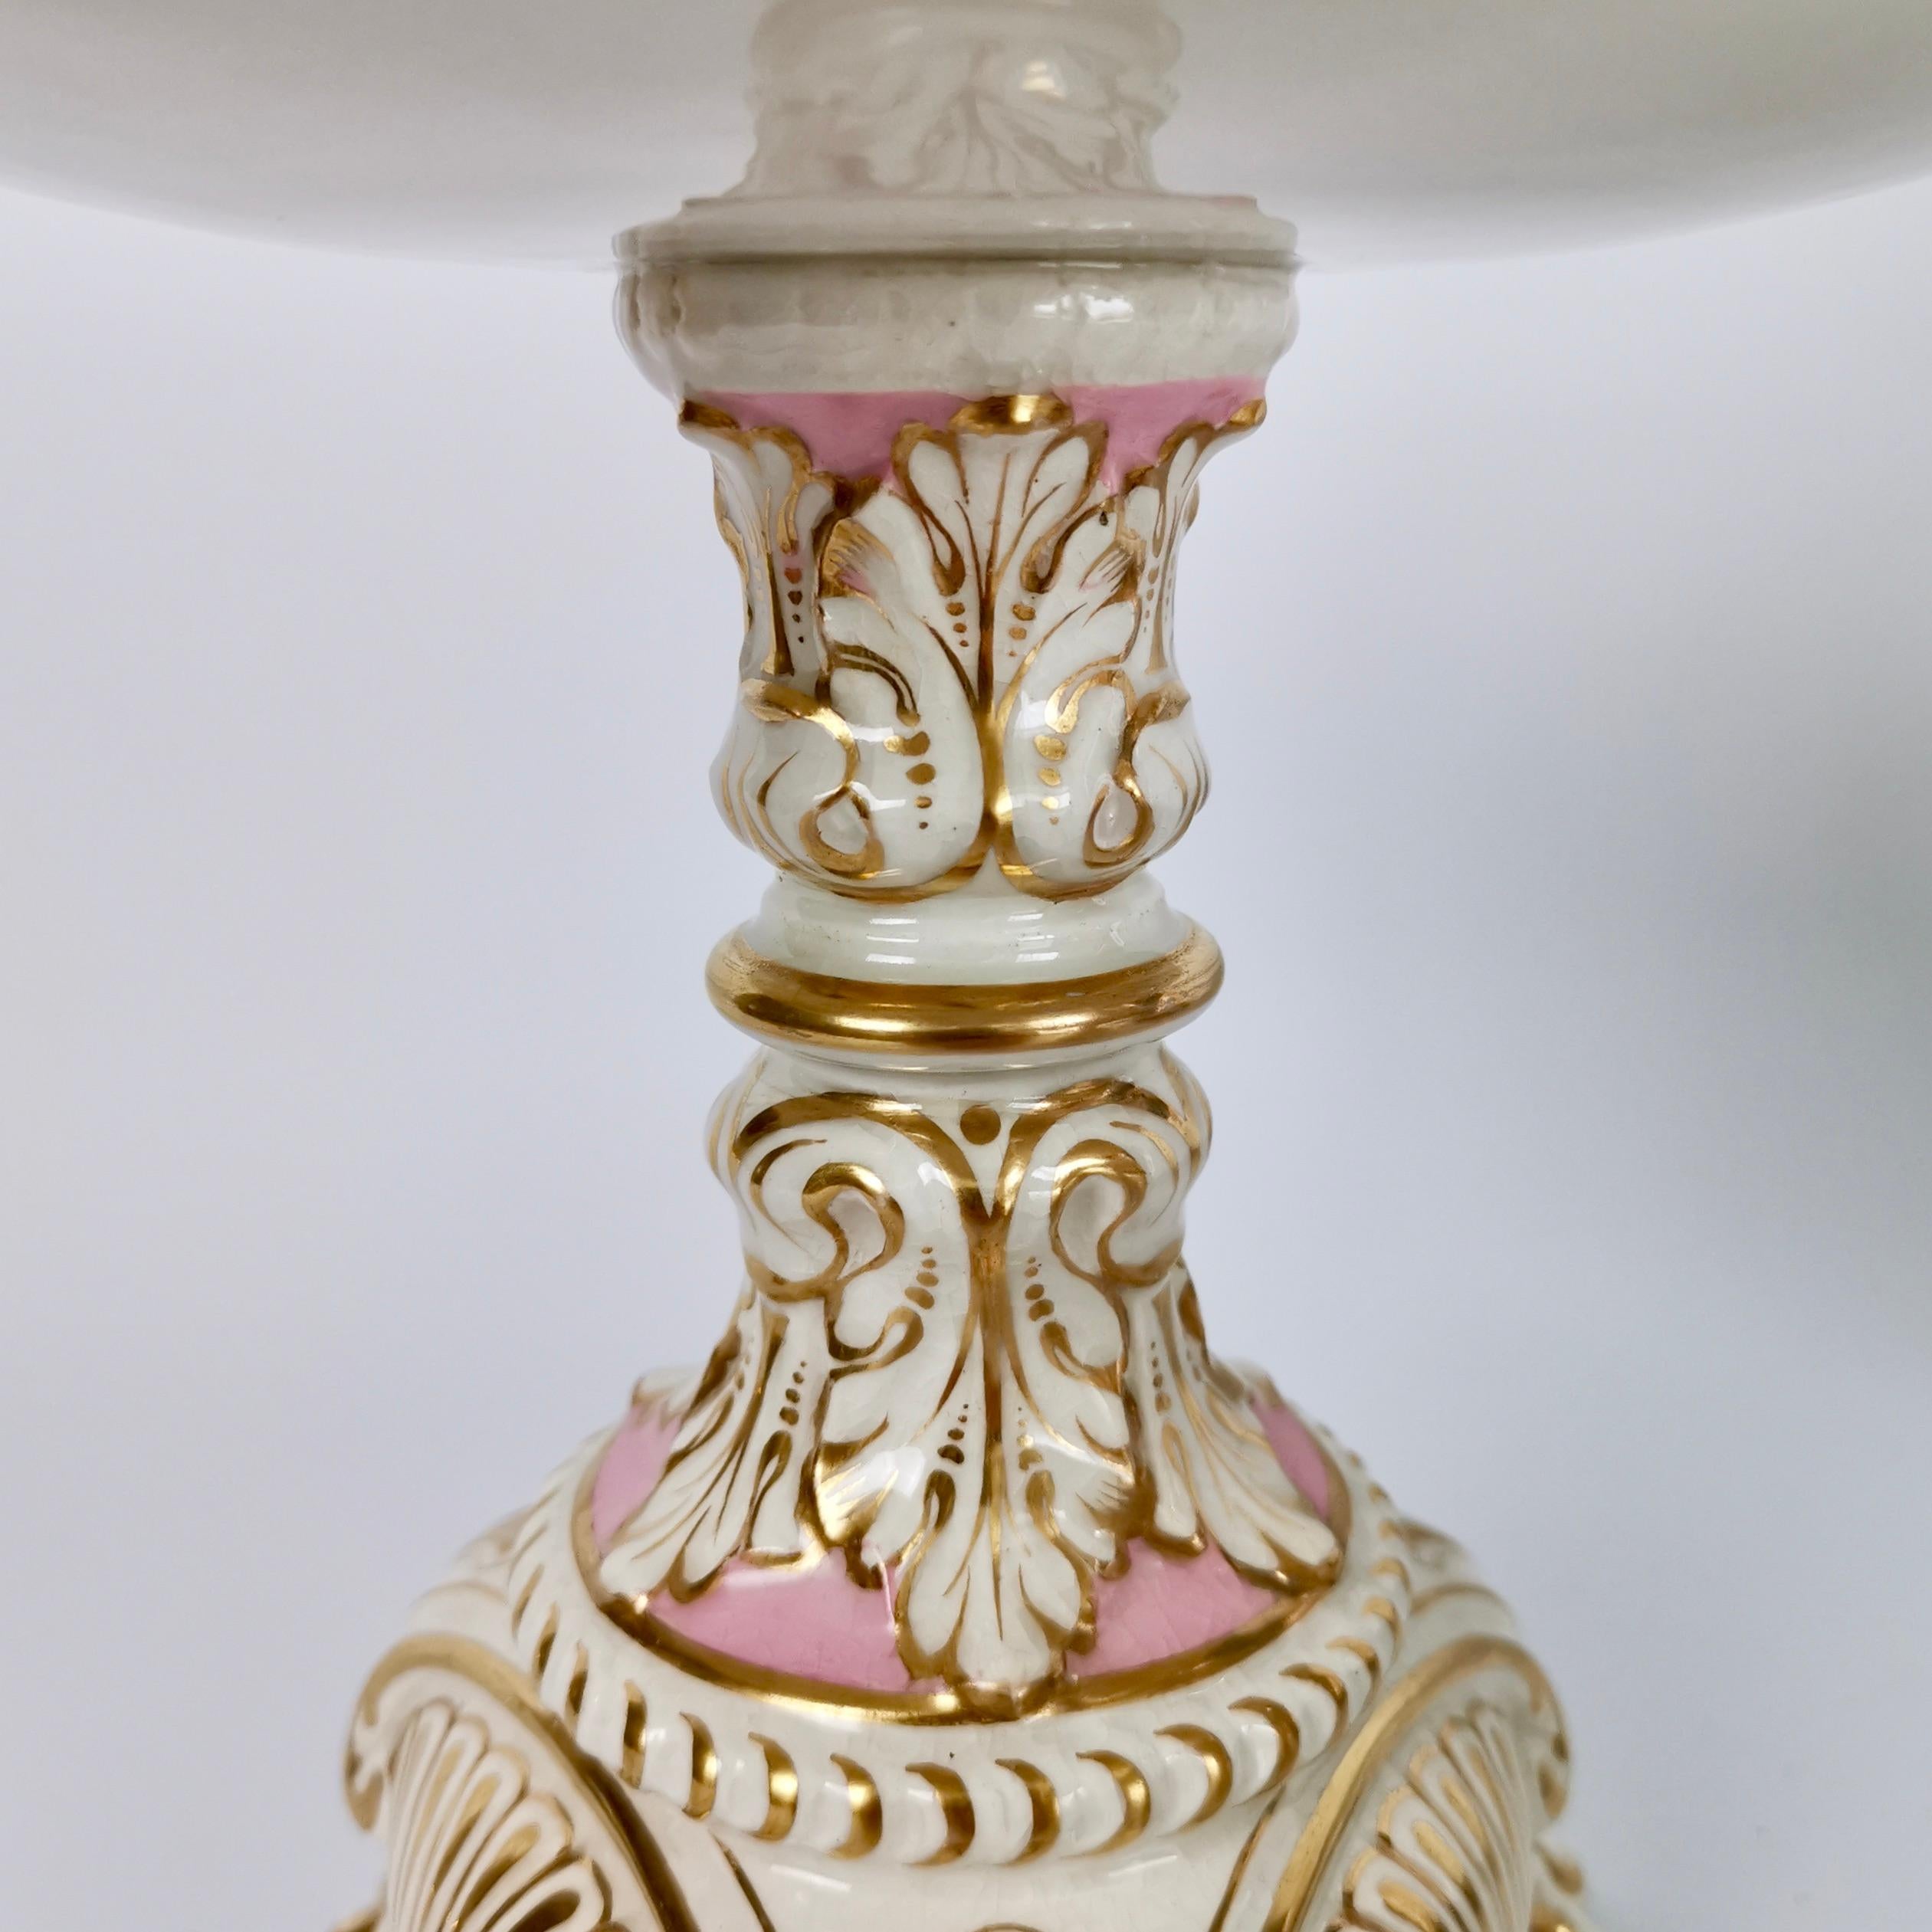 19th Century Pink Porcelain Dessert Service, Spectacular Claw-Footed Tazzas, Victorian